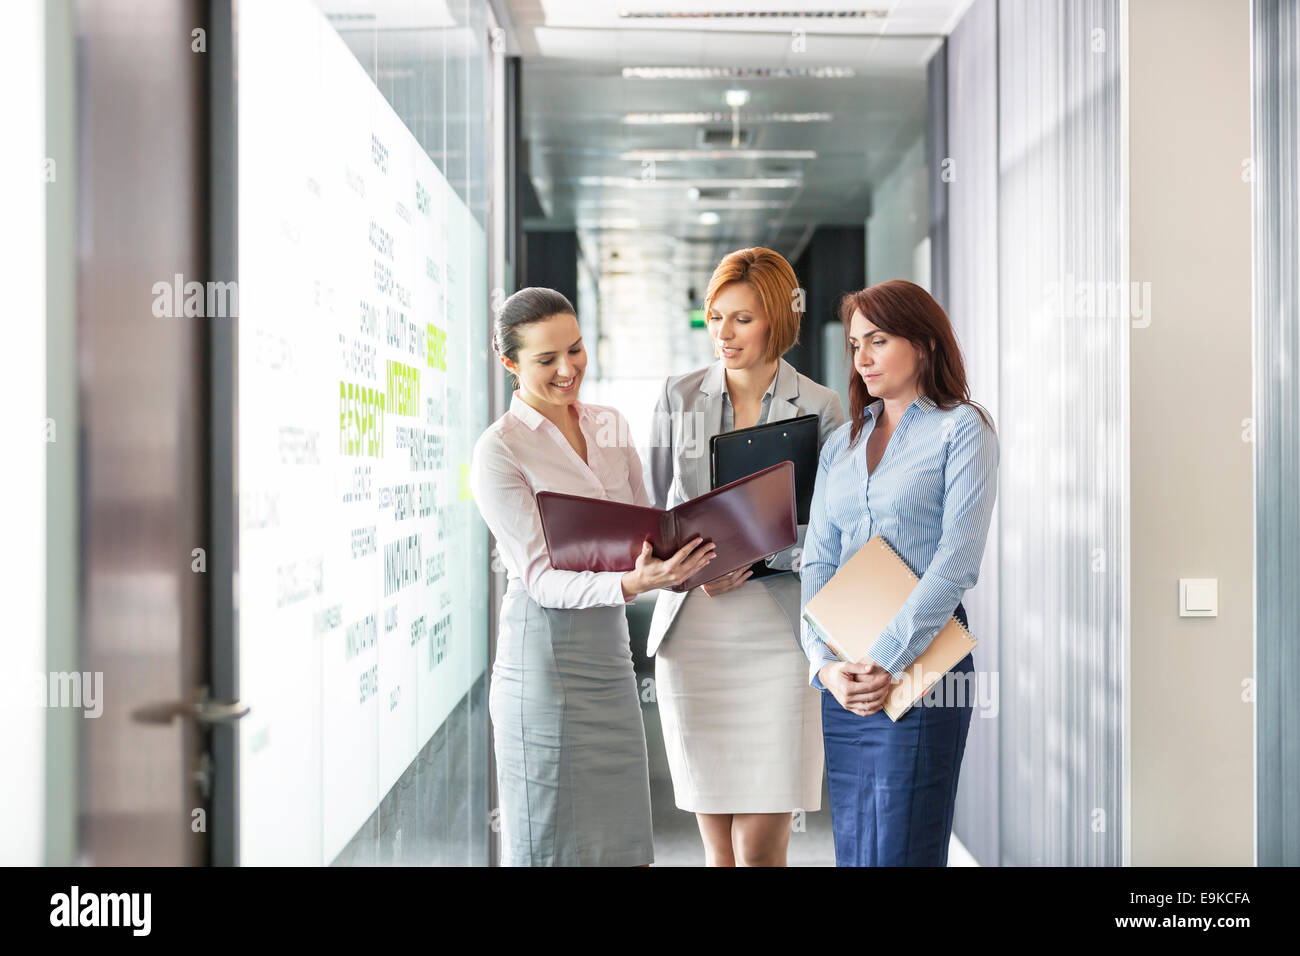 Businesswomen with file folders discussing in office corridor Stock Photo